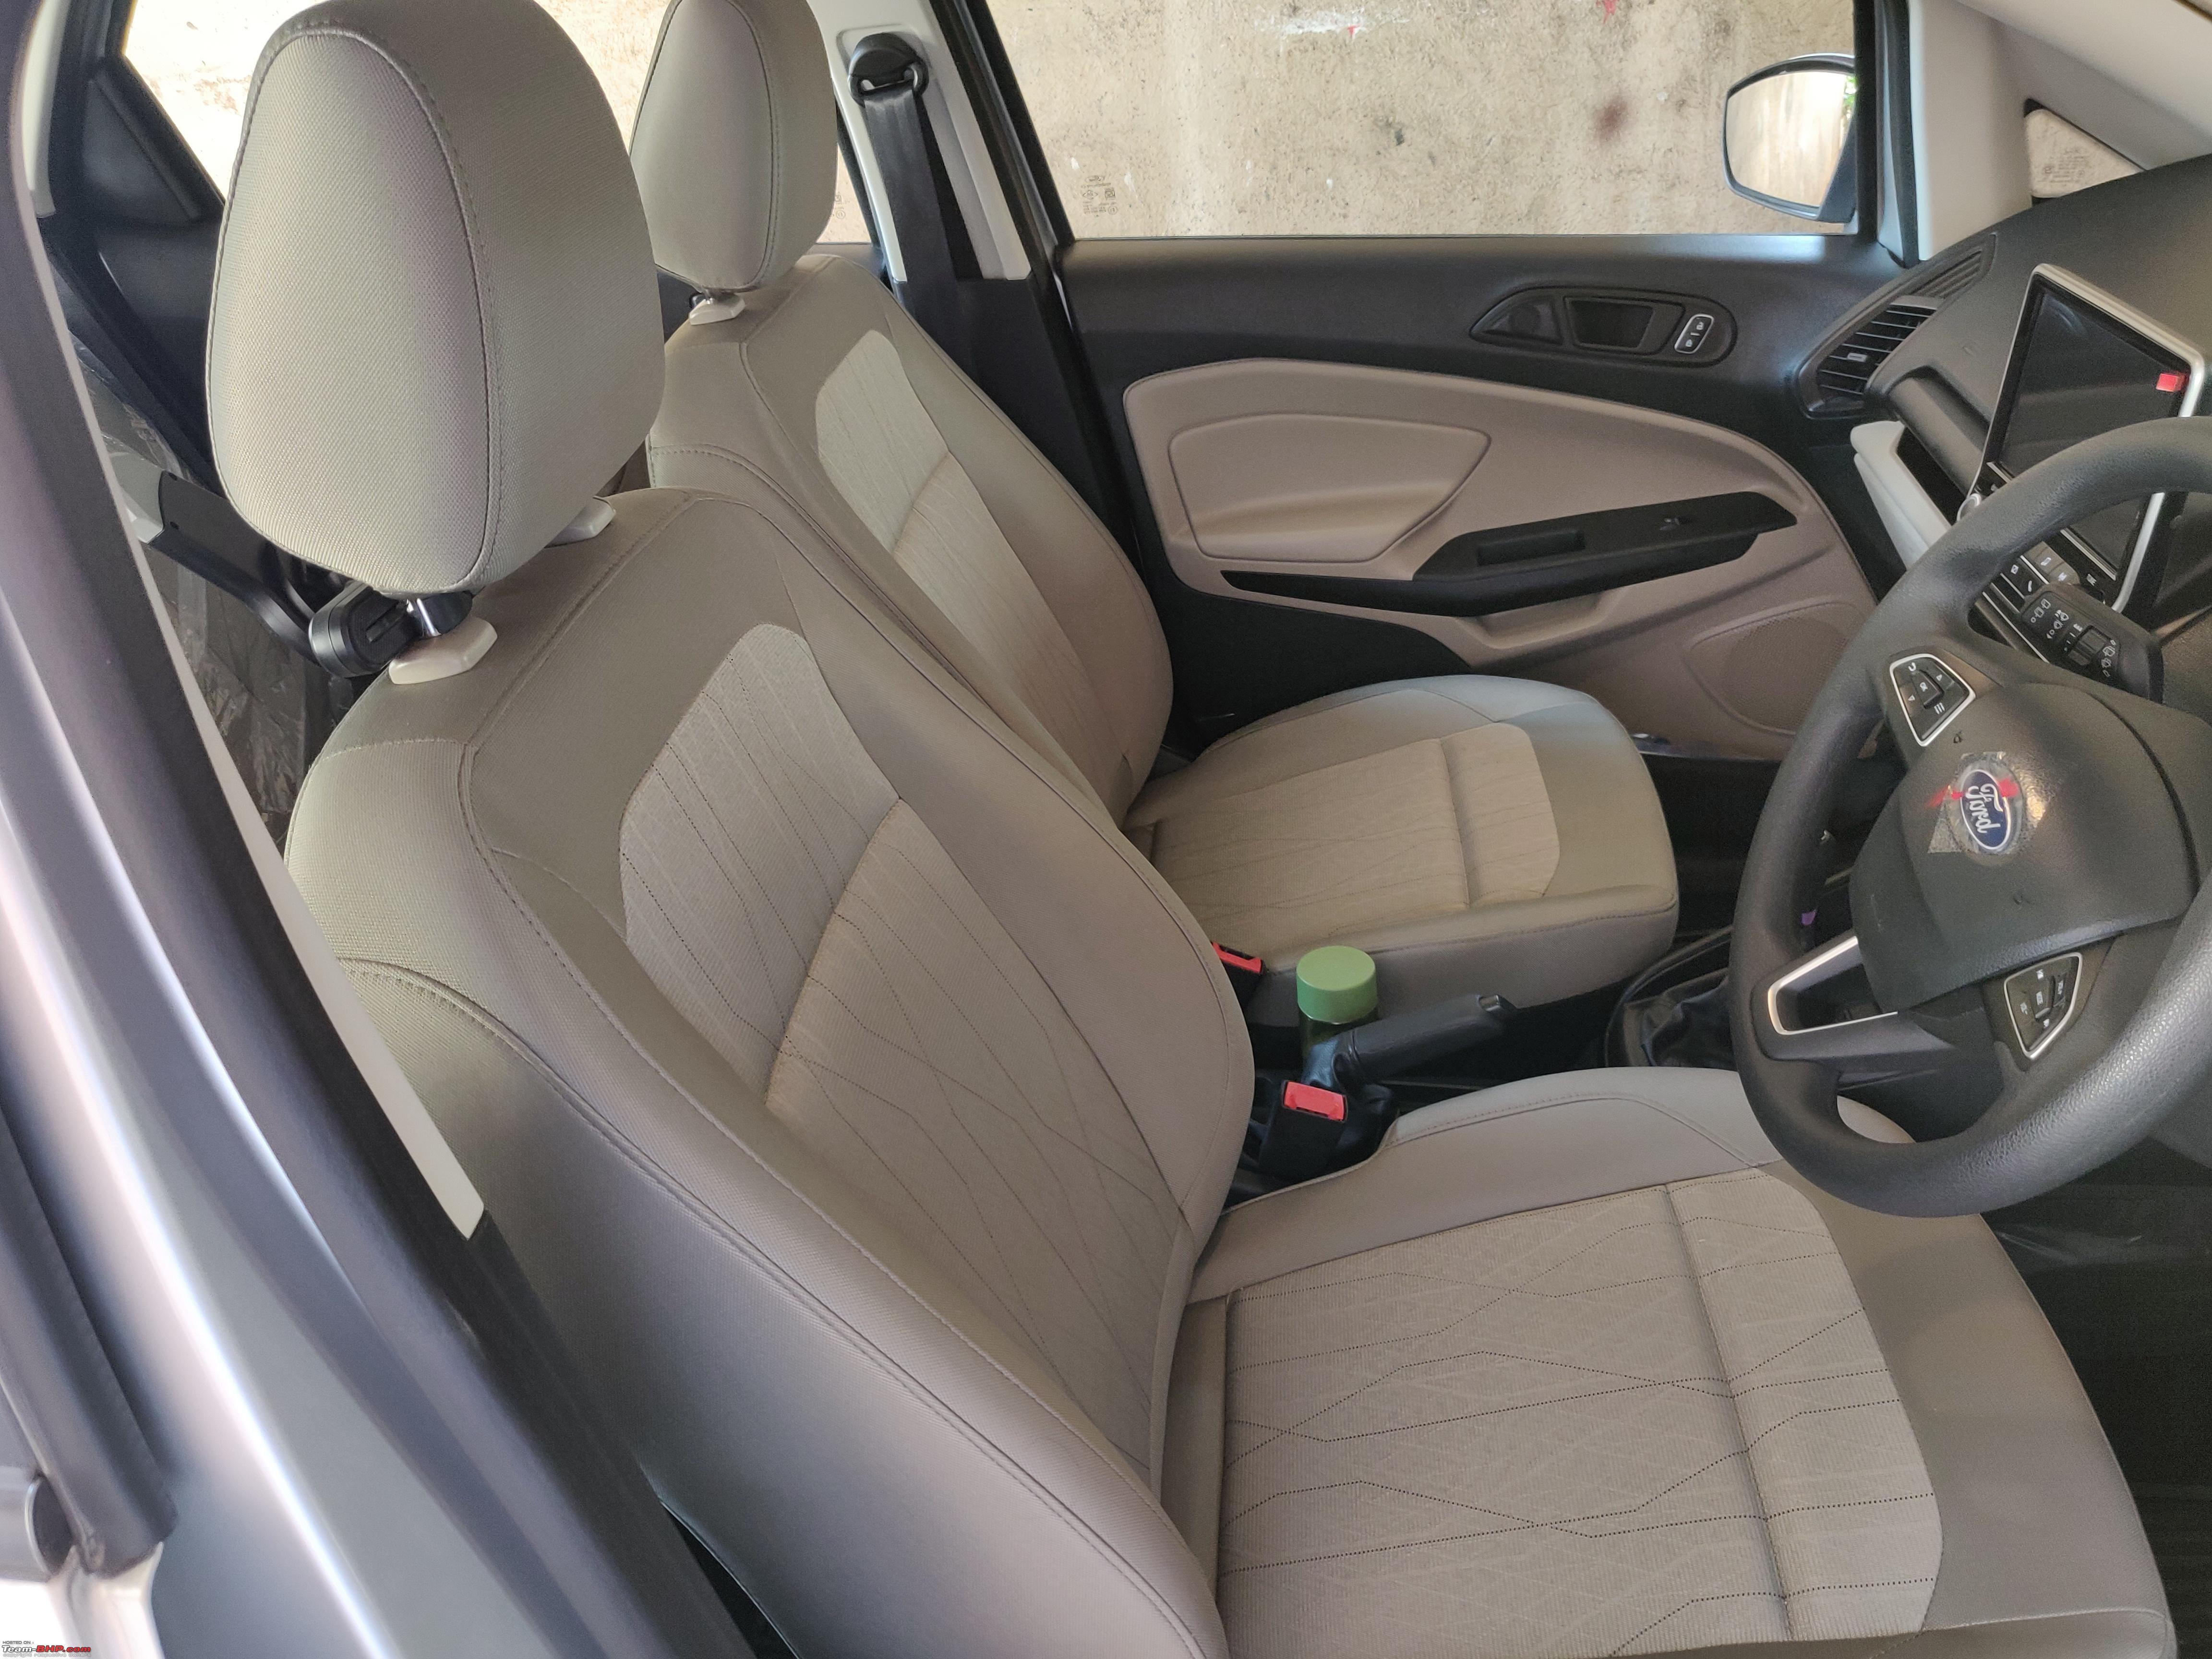 Ford EcoSport: Seat covers installed by Orchis, Mumbai - Team-BHP